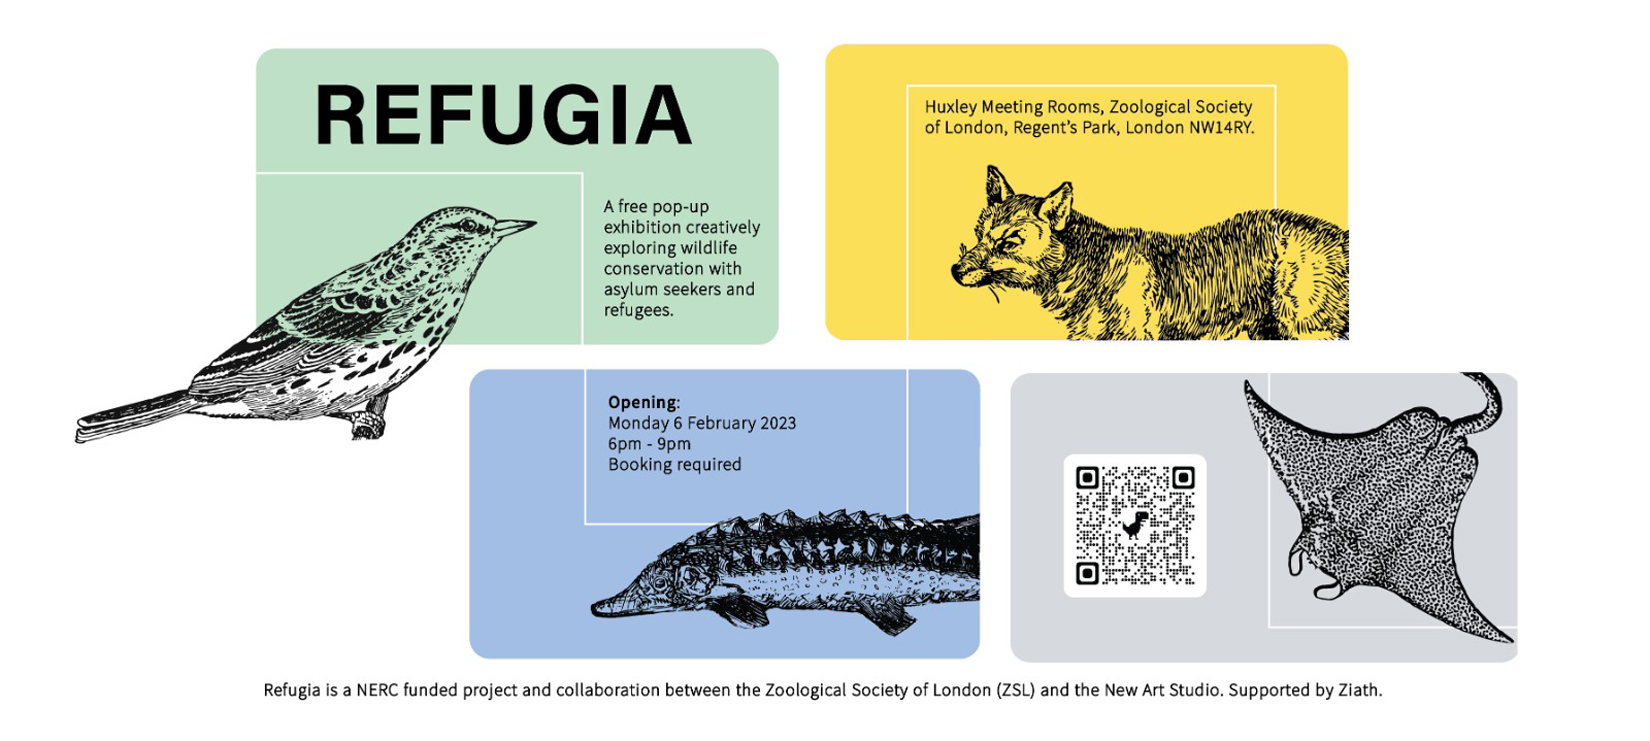 Refugia – Come to our free exhibition on 6th February